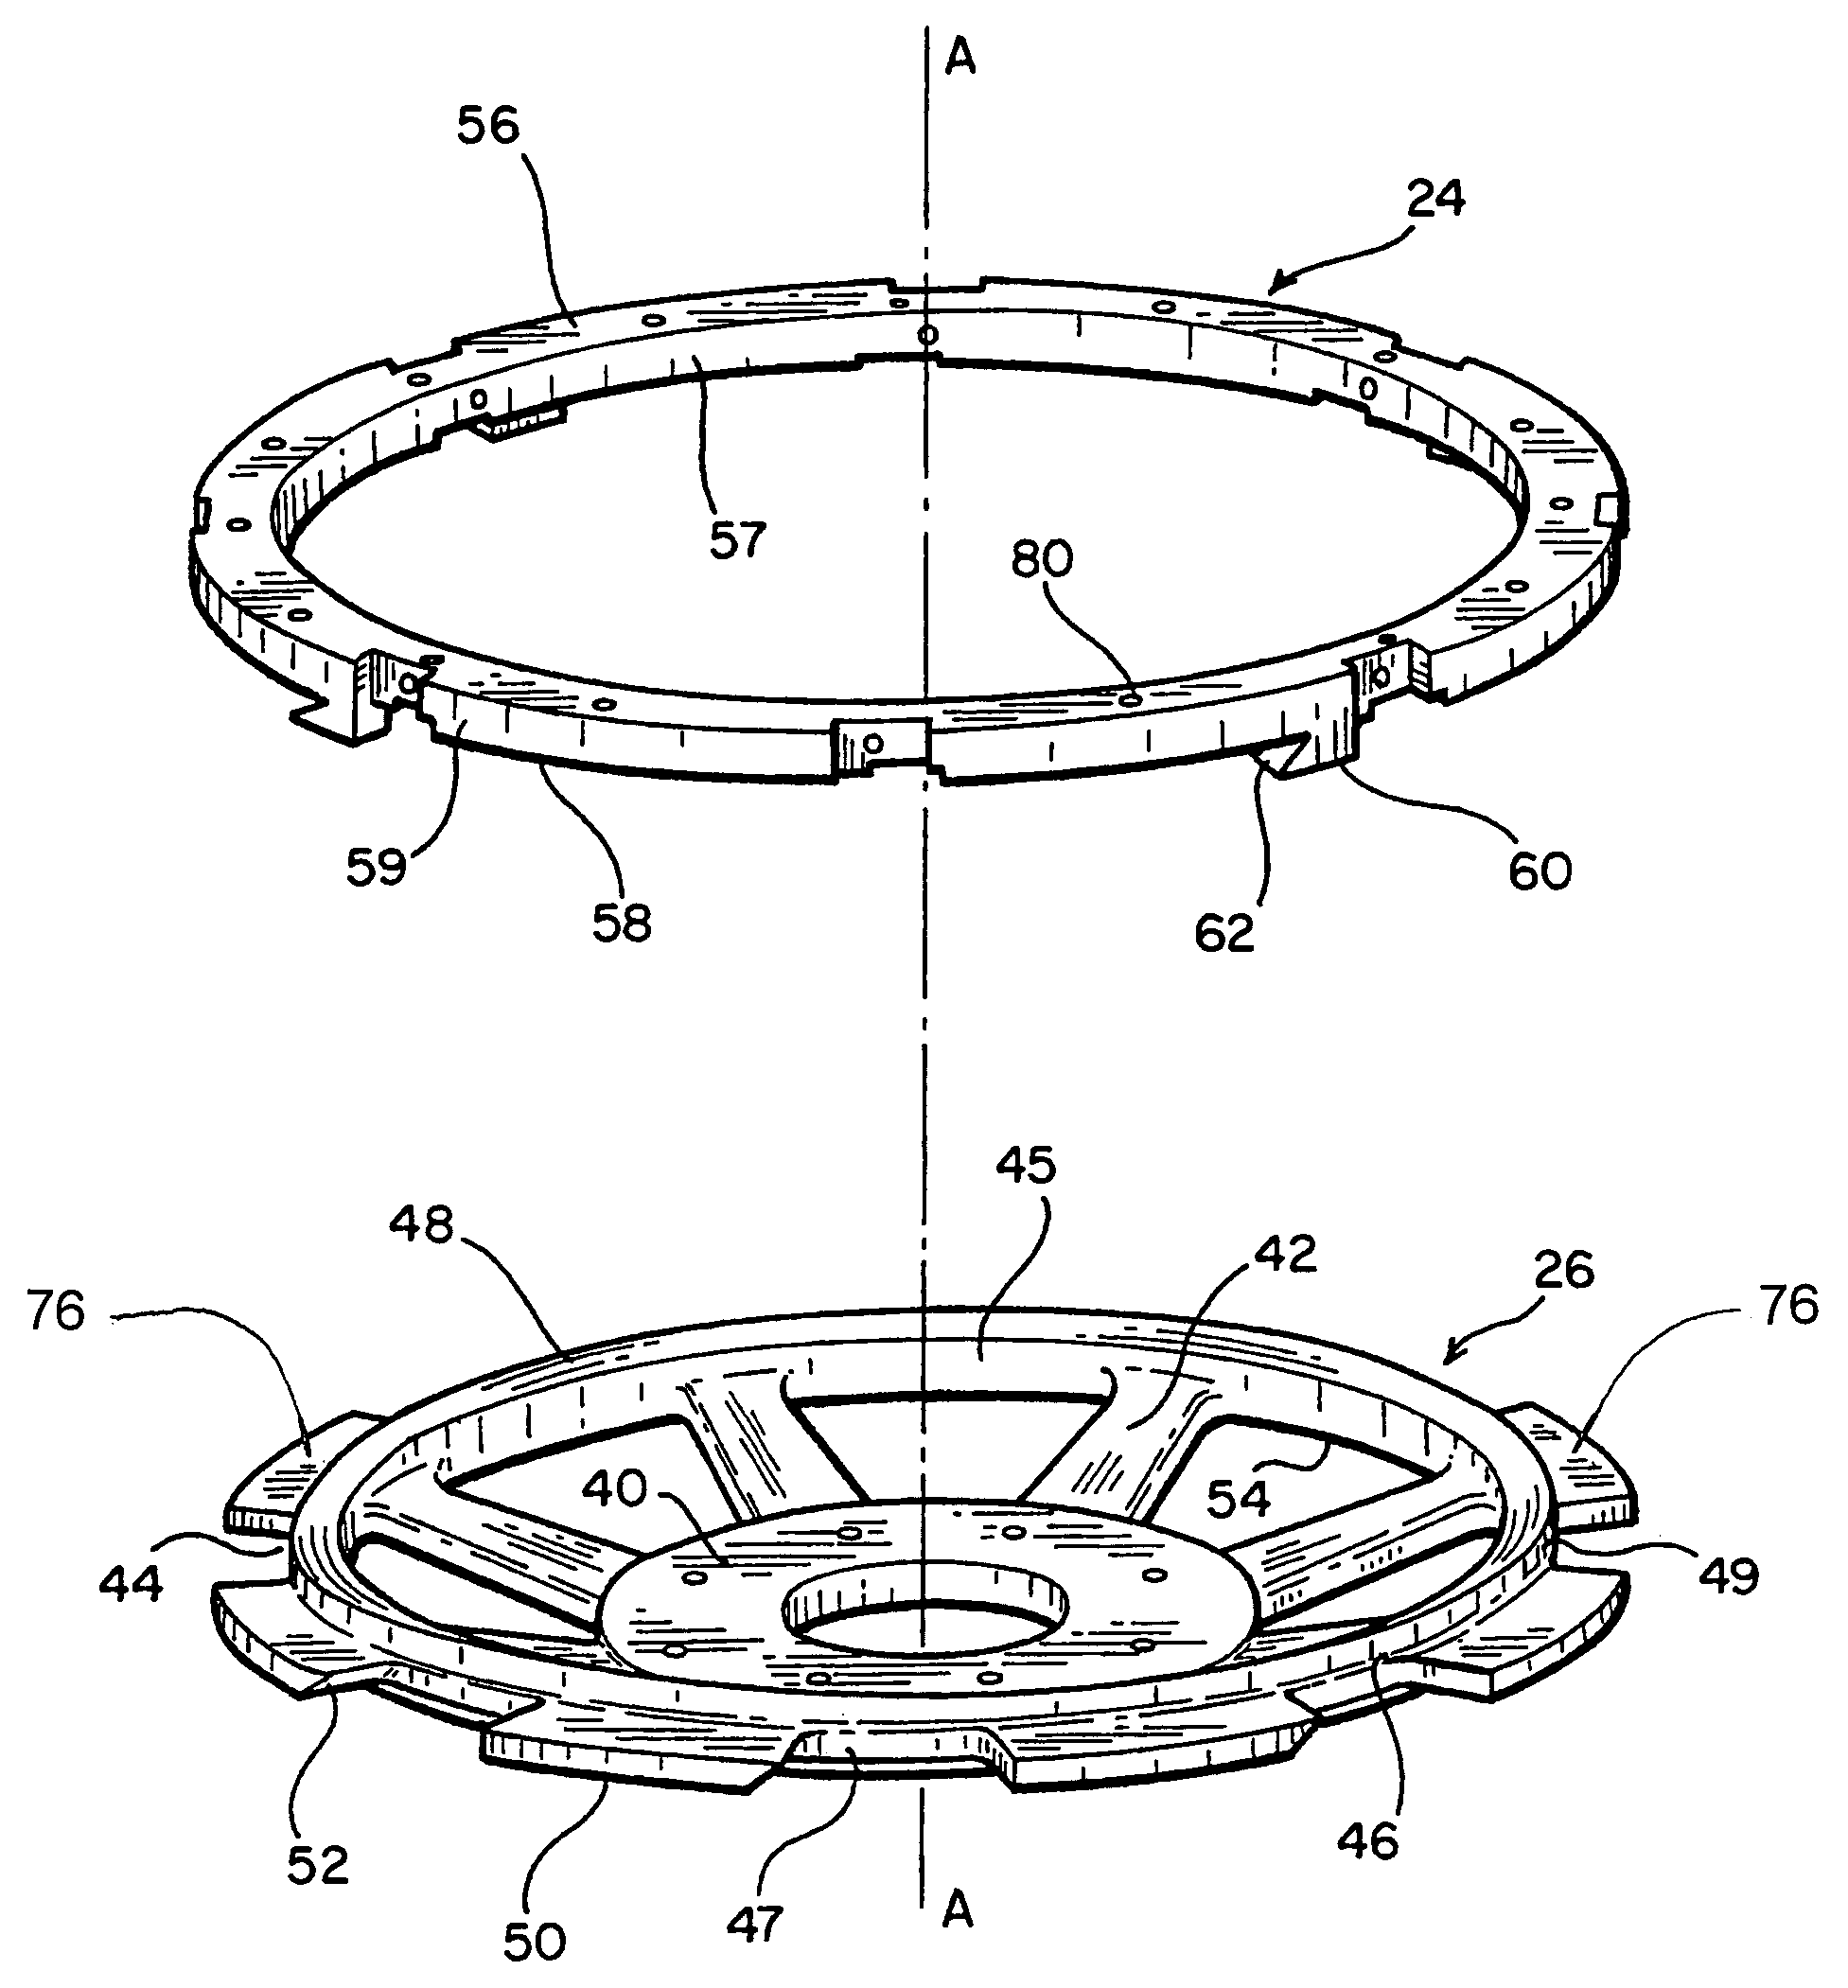 Cutting head mounting and support ring system